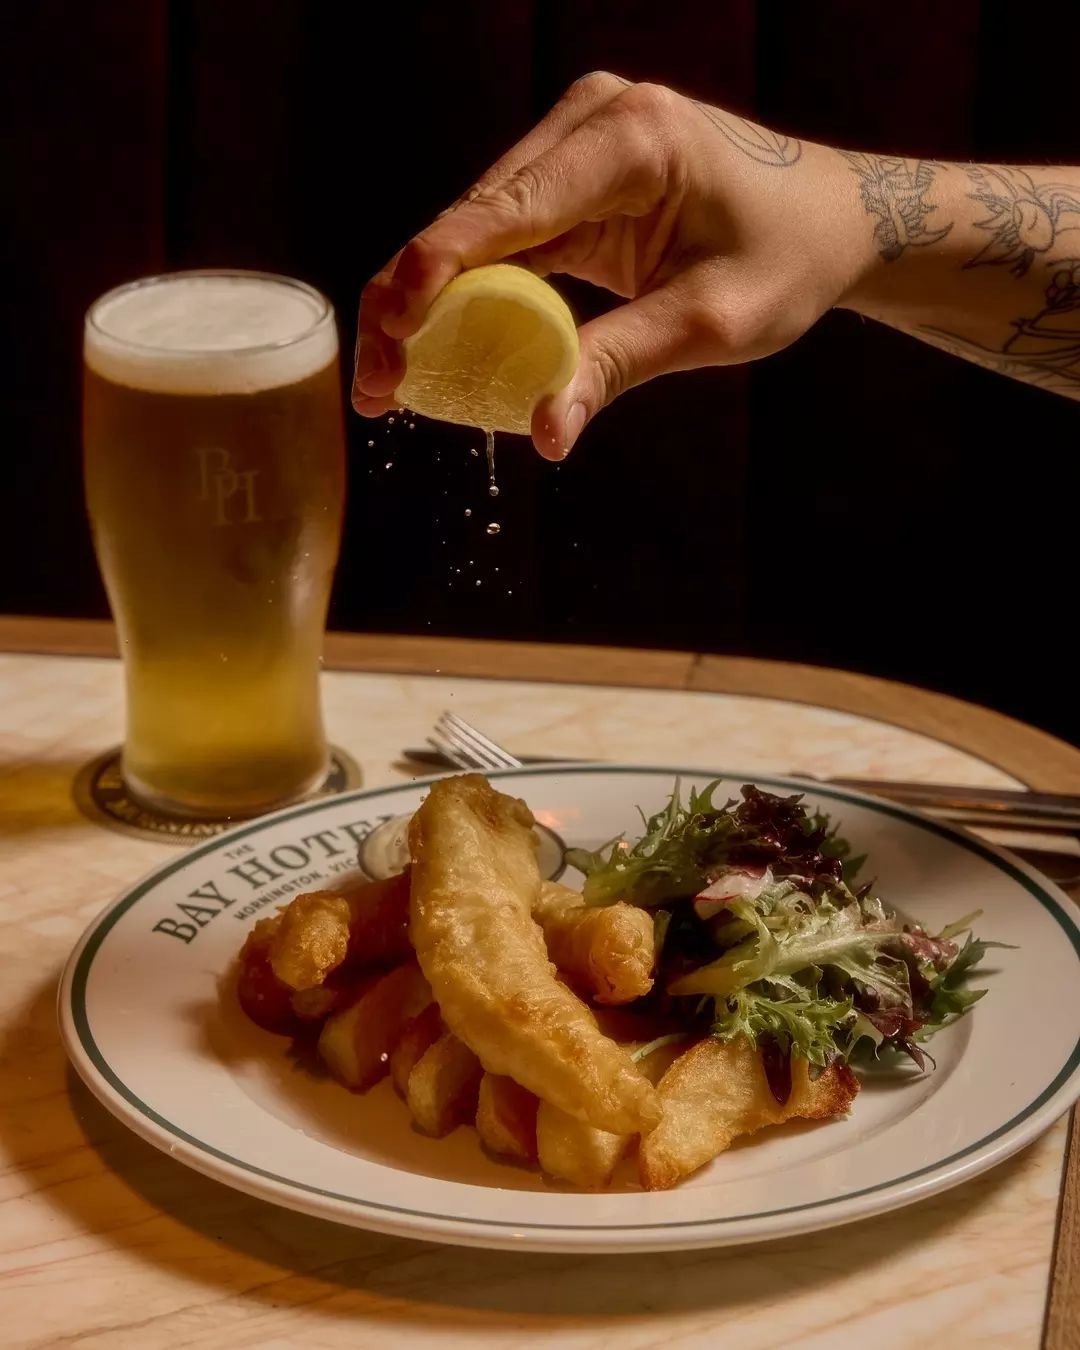 Wednesdays &mdash; an entire day dedicated to the crispy, golden fried combo that&rsquo;s best served with a pint of something ice-cold in hand.

Come down tonight and enjoy beer-battered market fish served with hand-cut chubby chips, yoghurt tartare